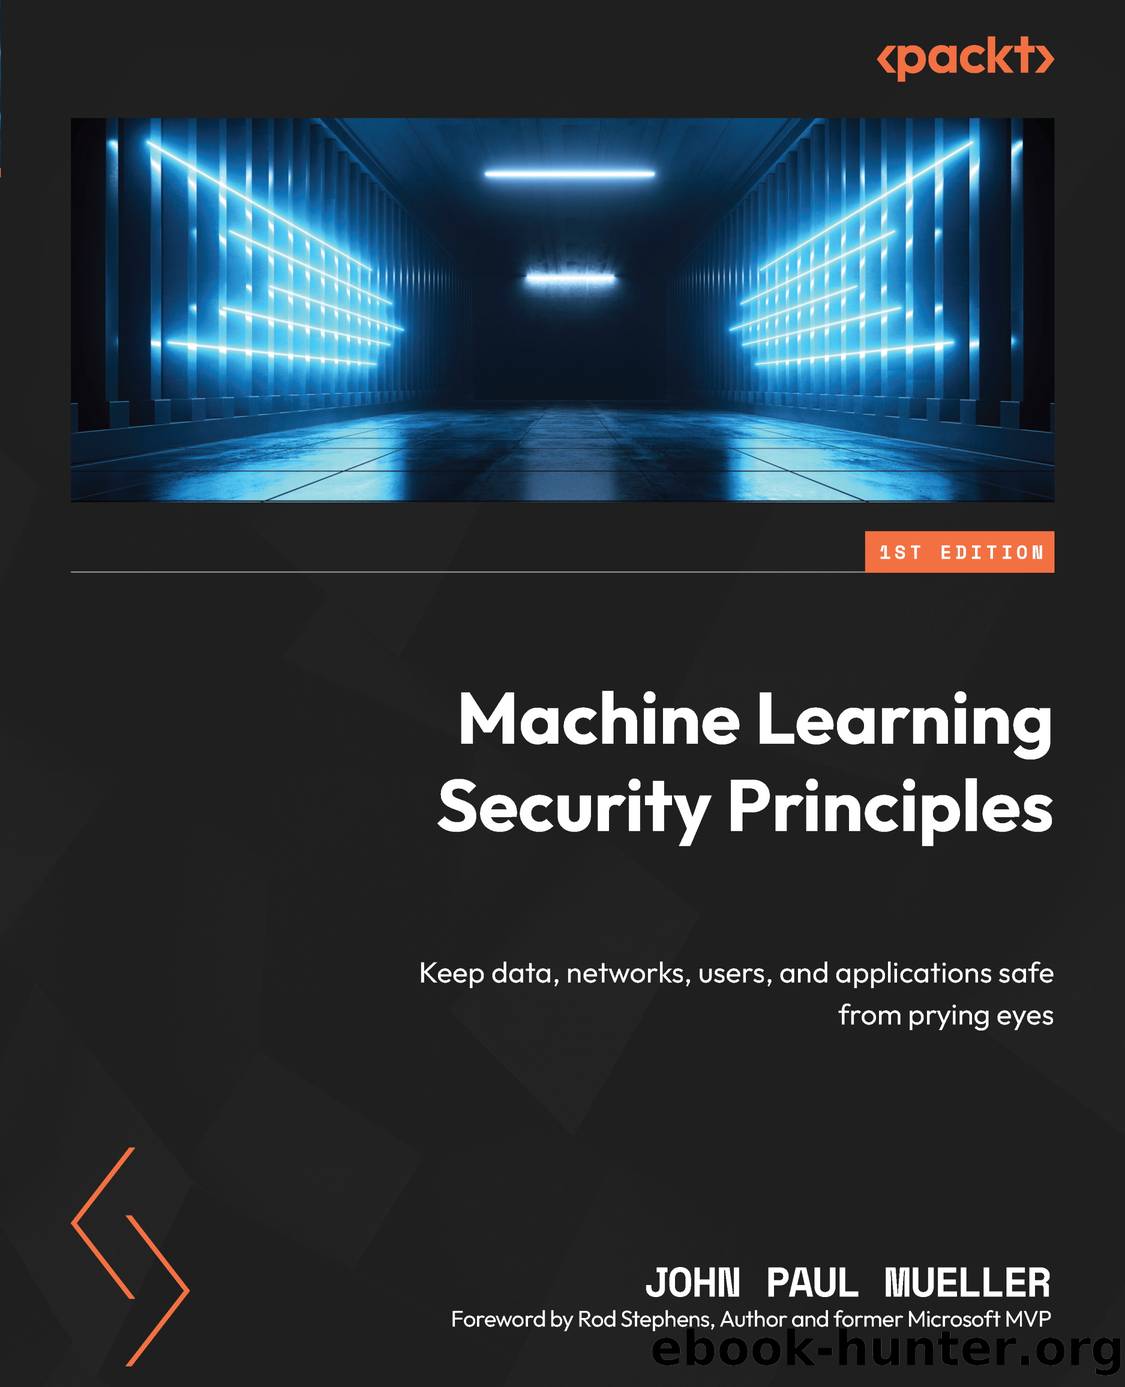 Machine Learning Security Principles by John Paul Mueller